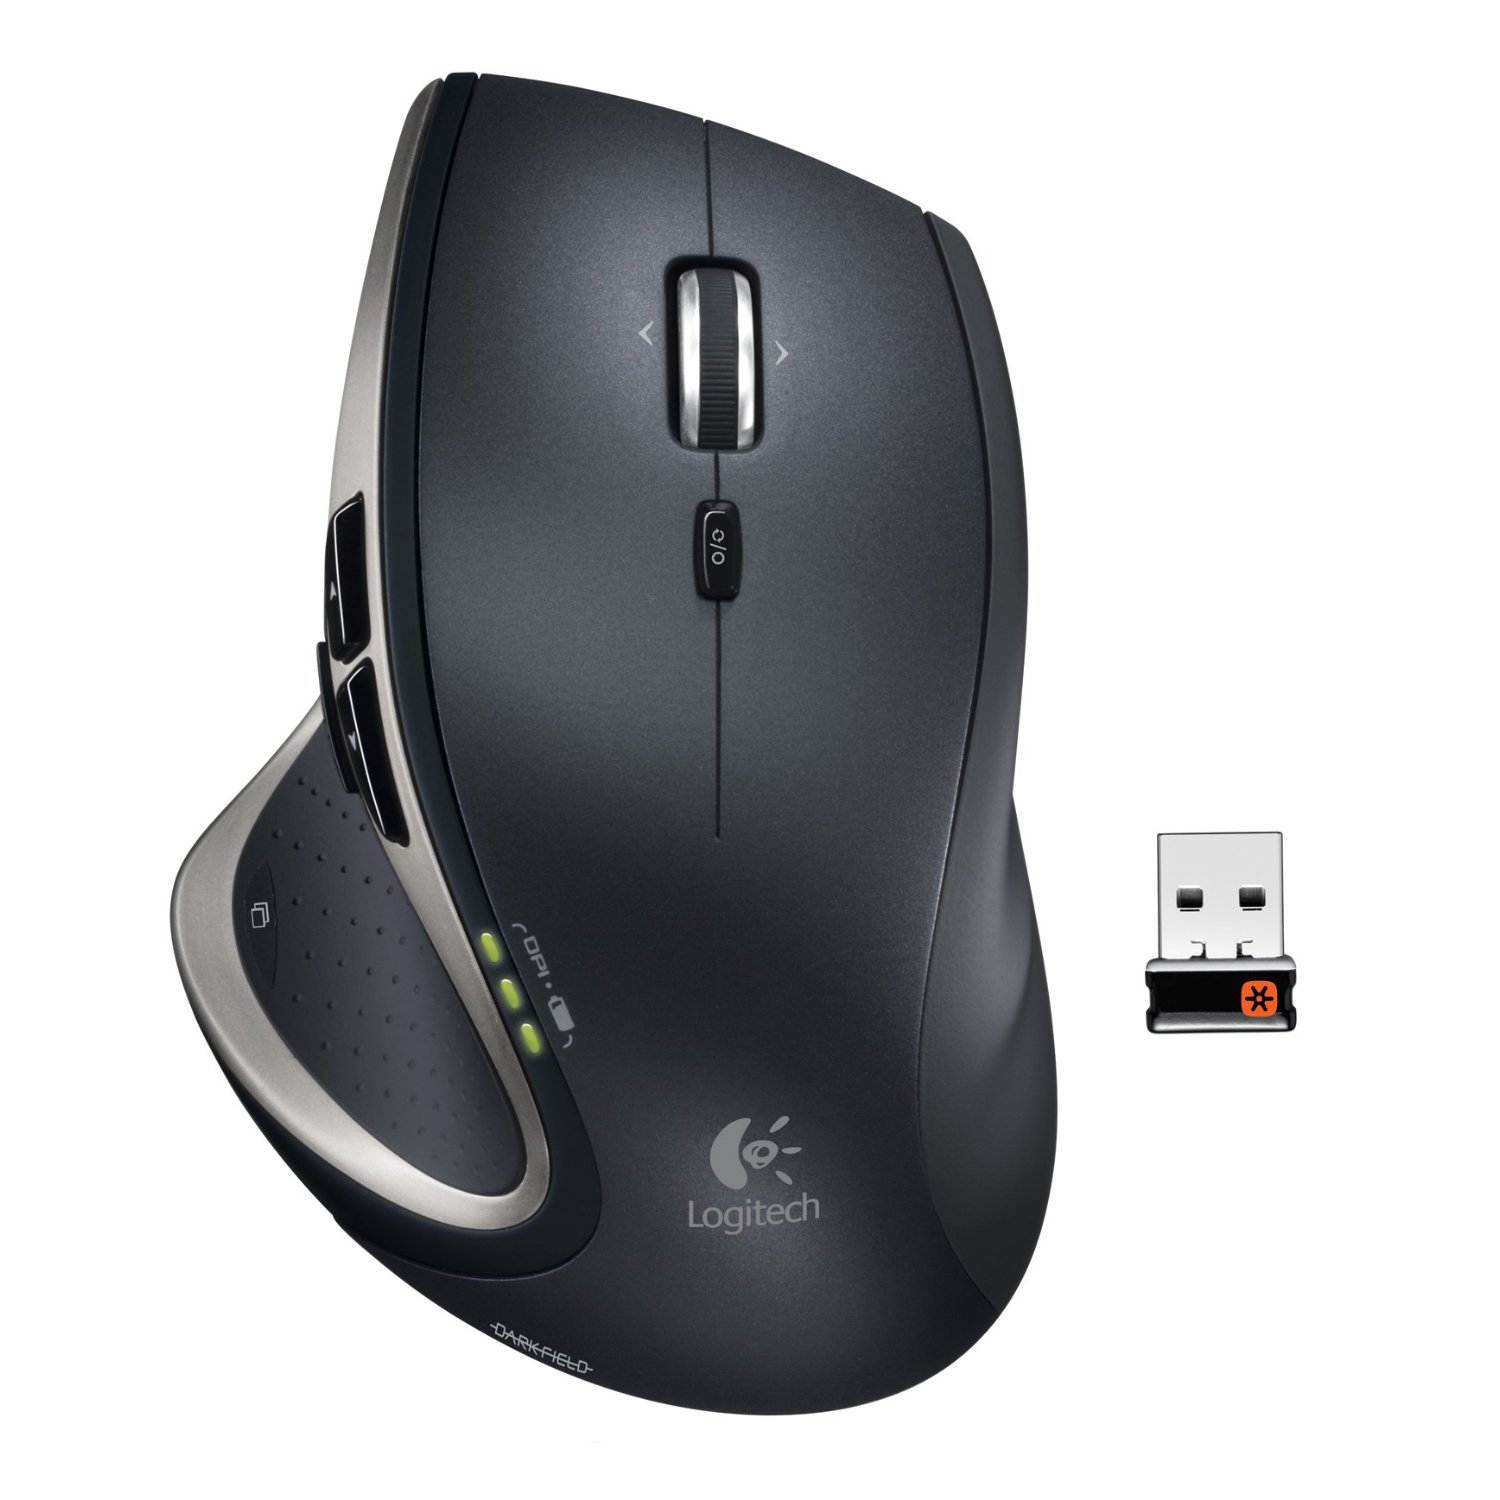 http://thetechjournal.com/wp-content/uploads/images/1111/1320199676-logitech-wireless-performance-mouse-mx-for-pc-and-mac-14.jpg